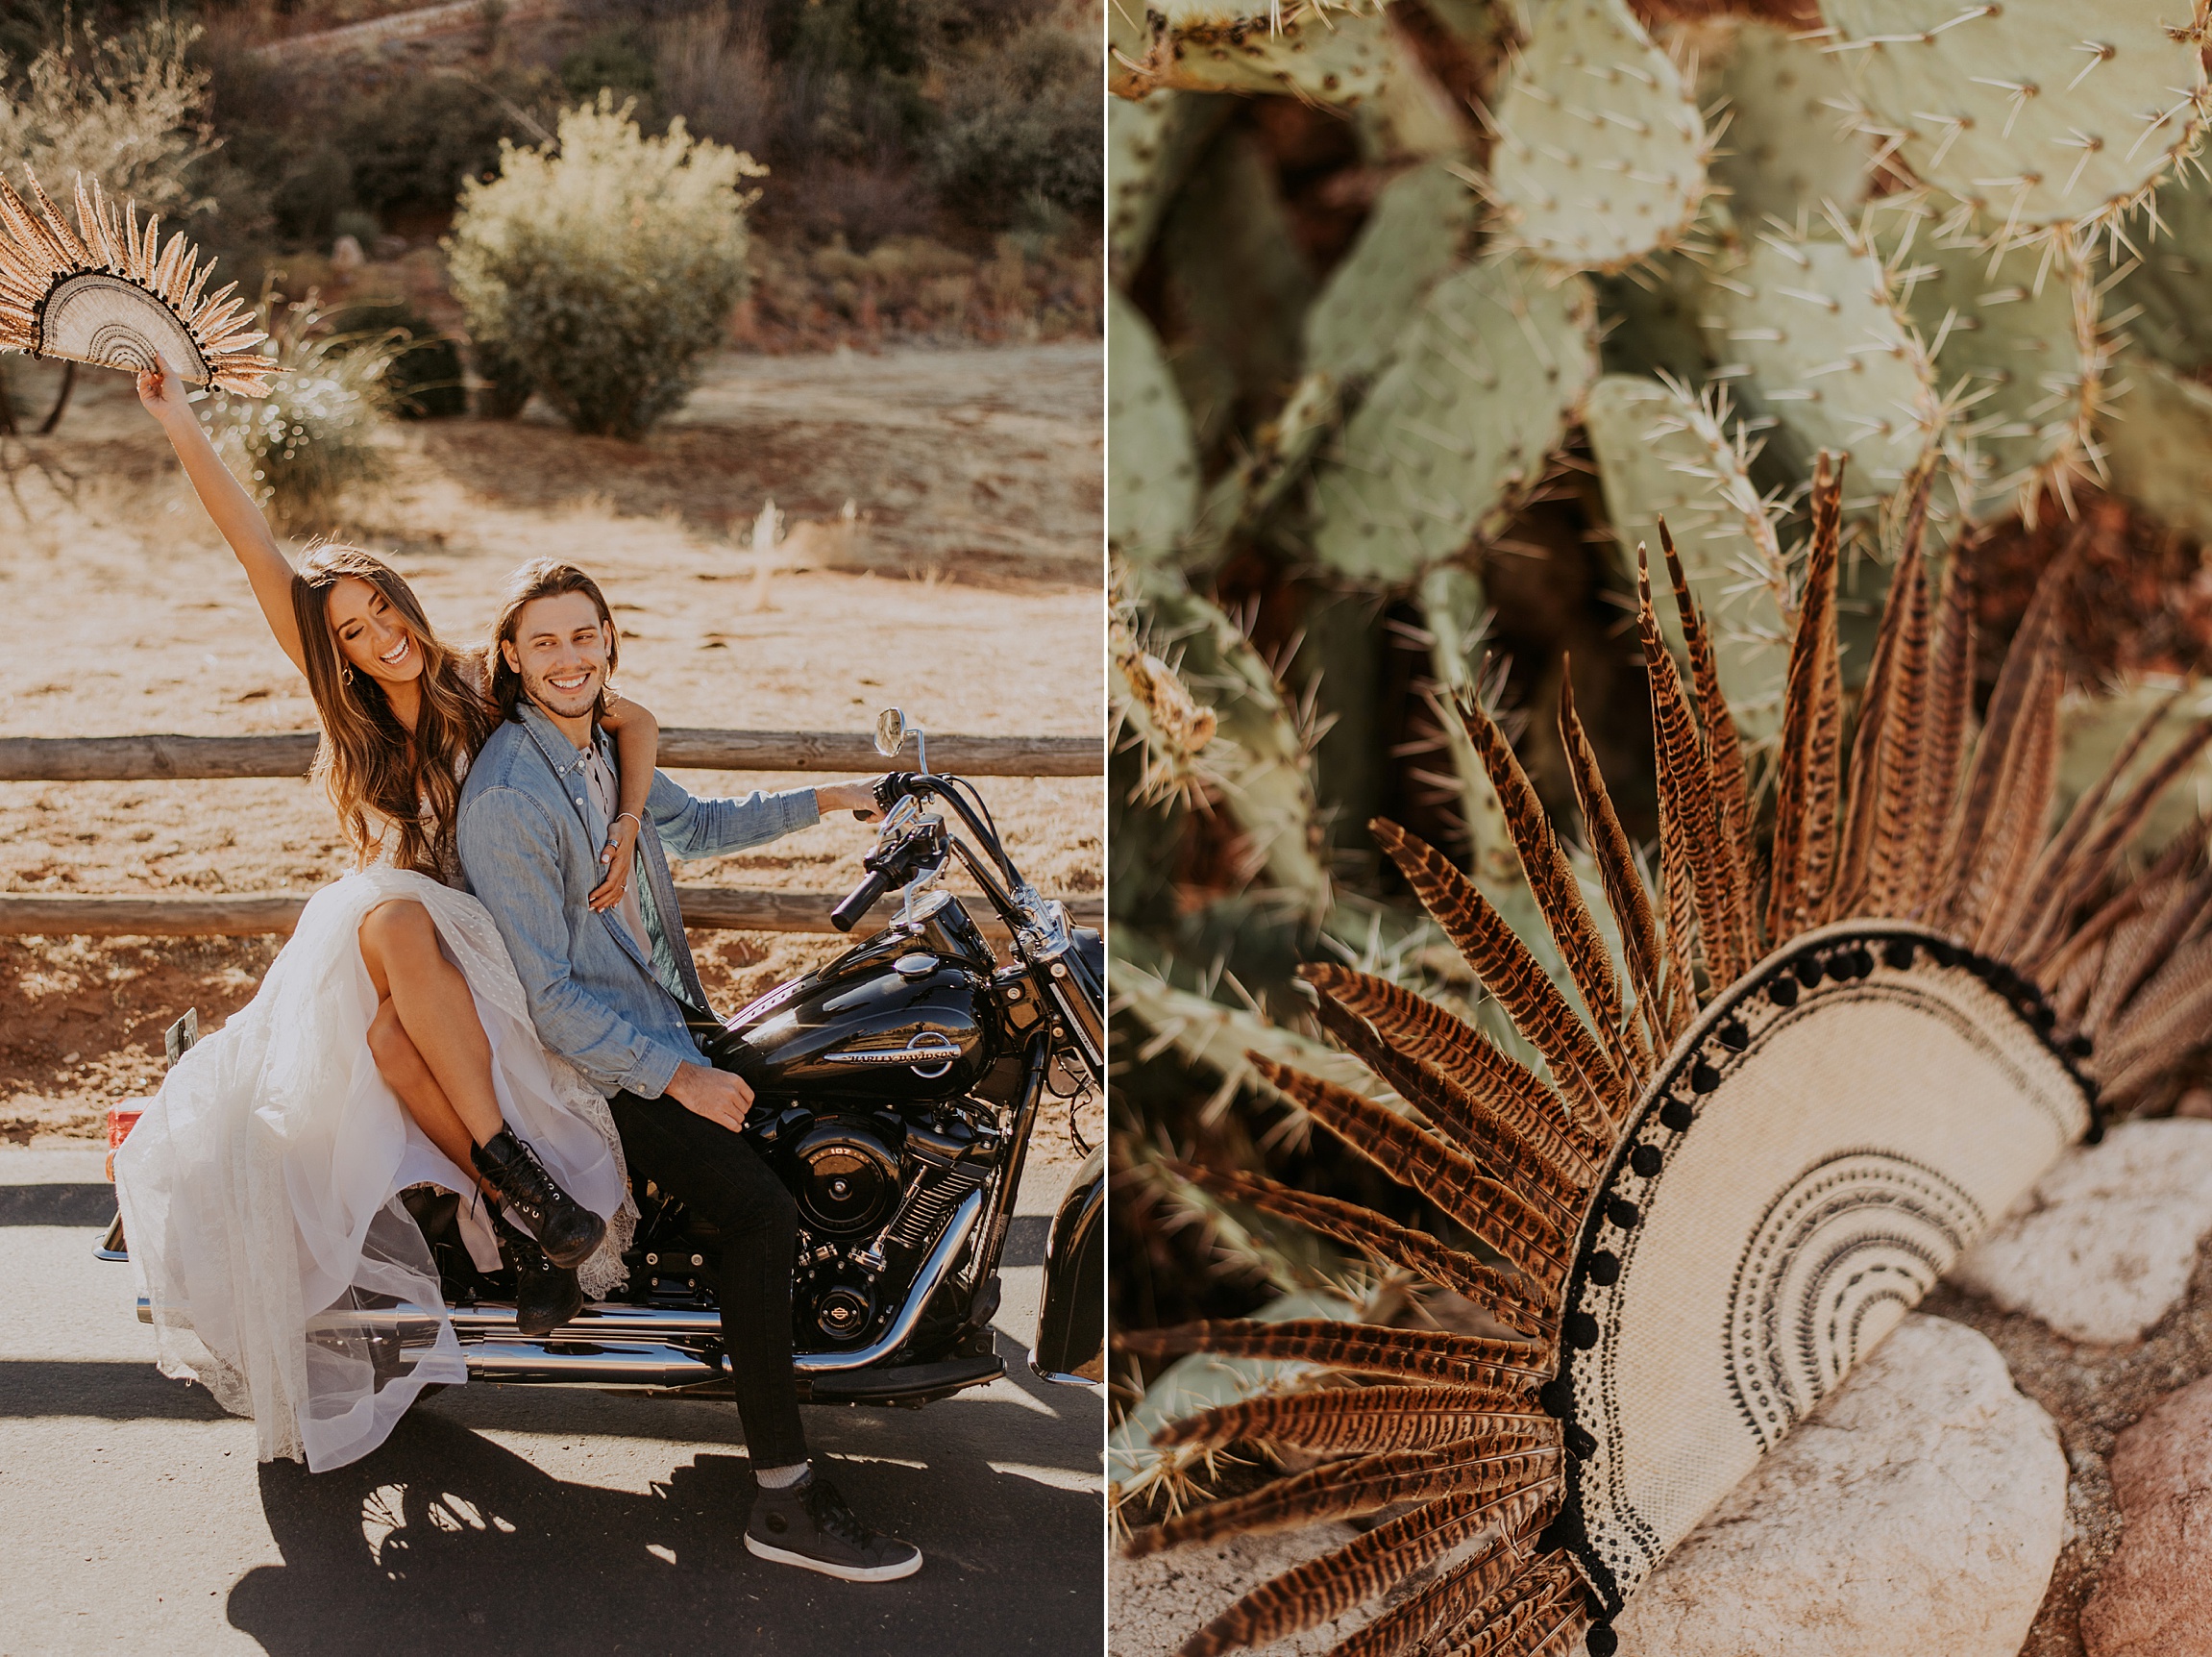 Engagement in Sedona AZ, Elopement in Sedona, Bride and Groom, Harley Davidson Motorcycle, Le Laurier Bridal, Adventurous Elopement, Arizona Wedding Photographer, Engaged, bridal fan, feathers, combat boots